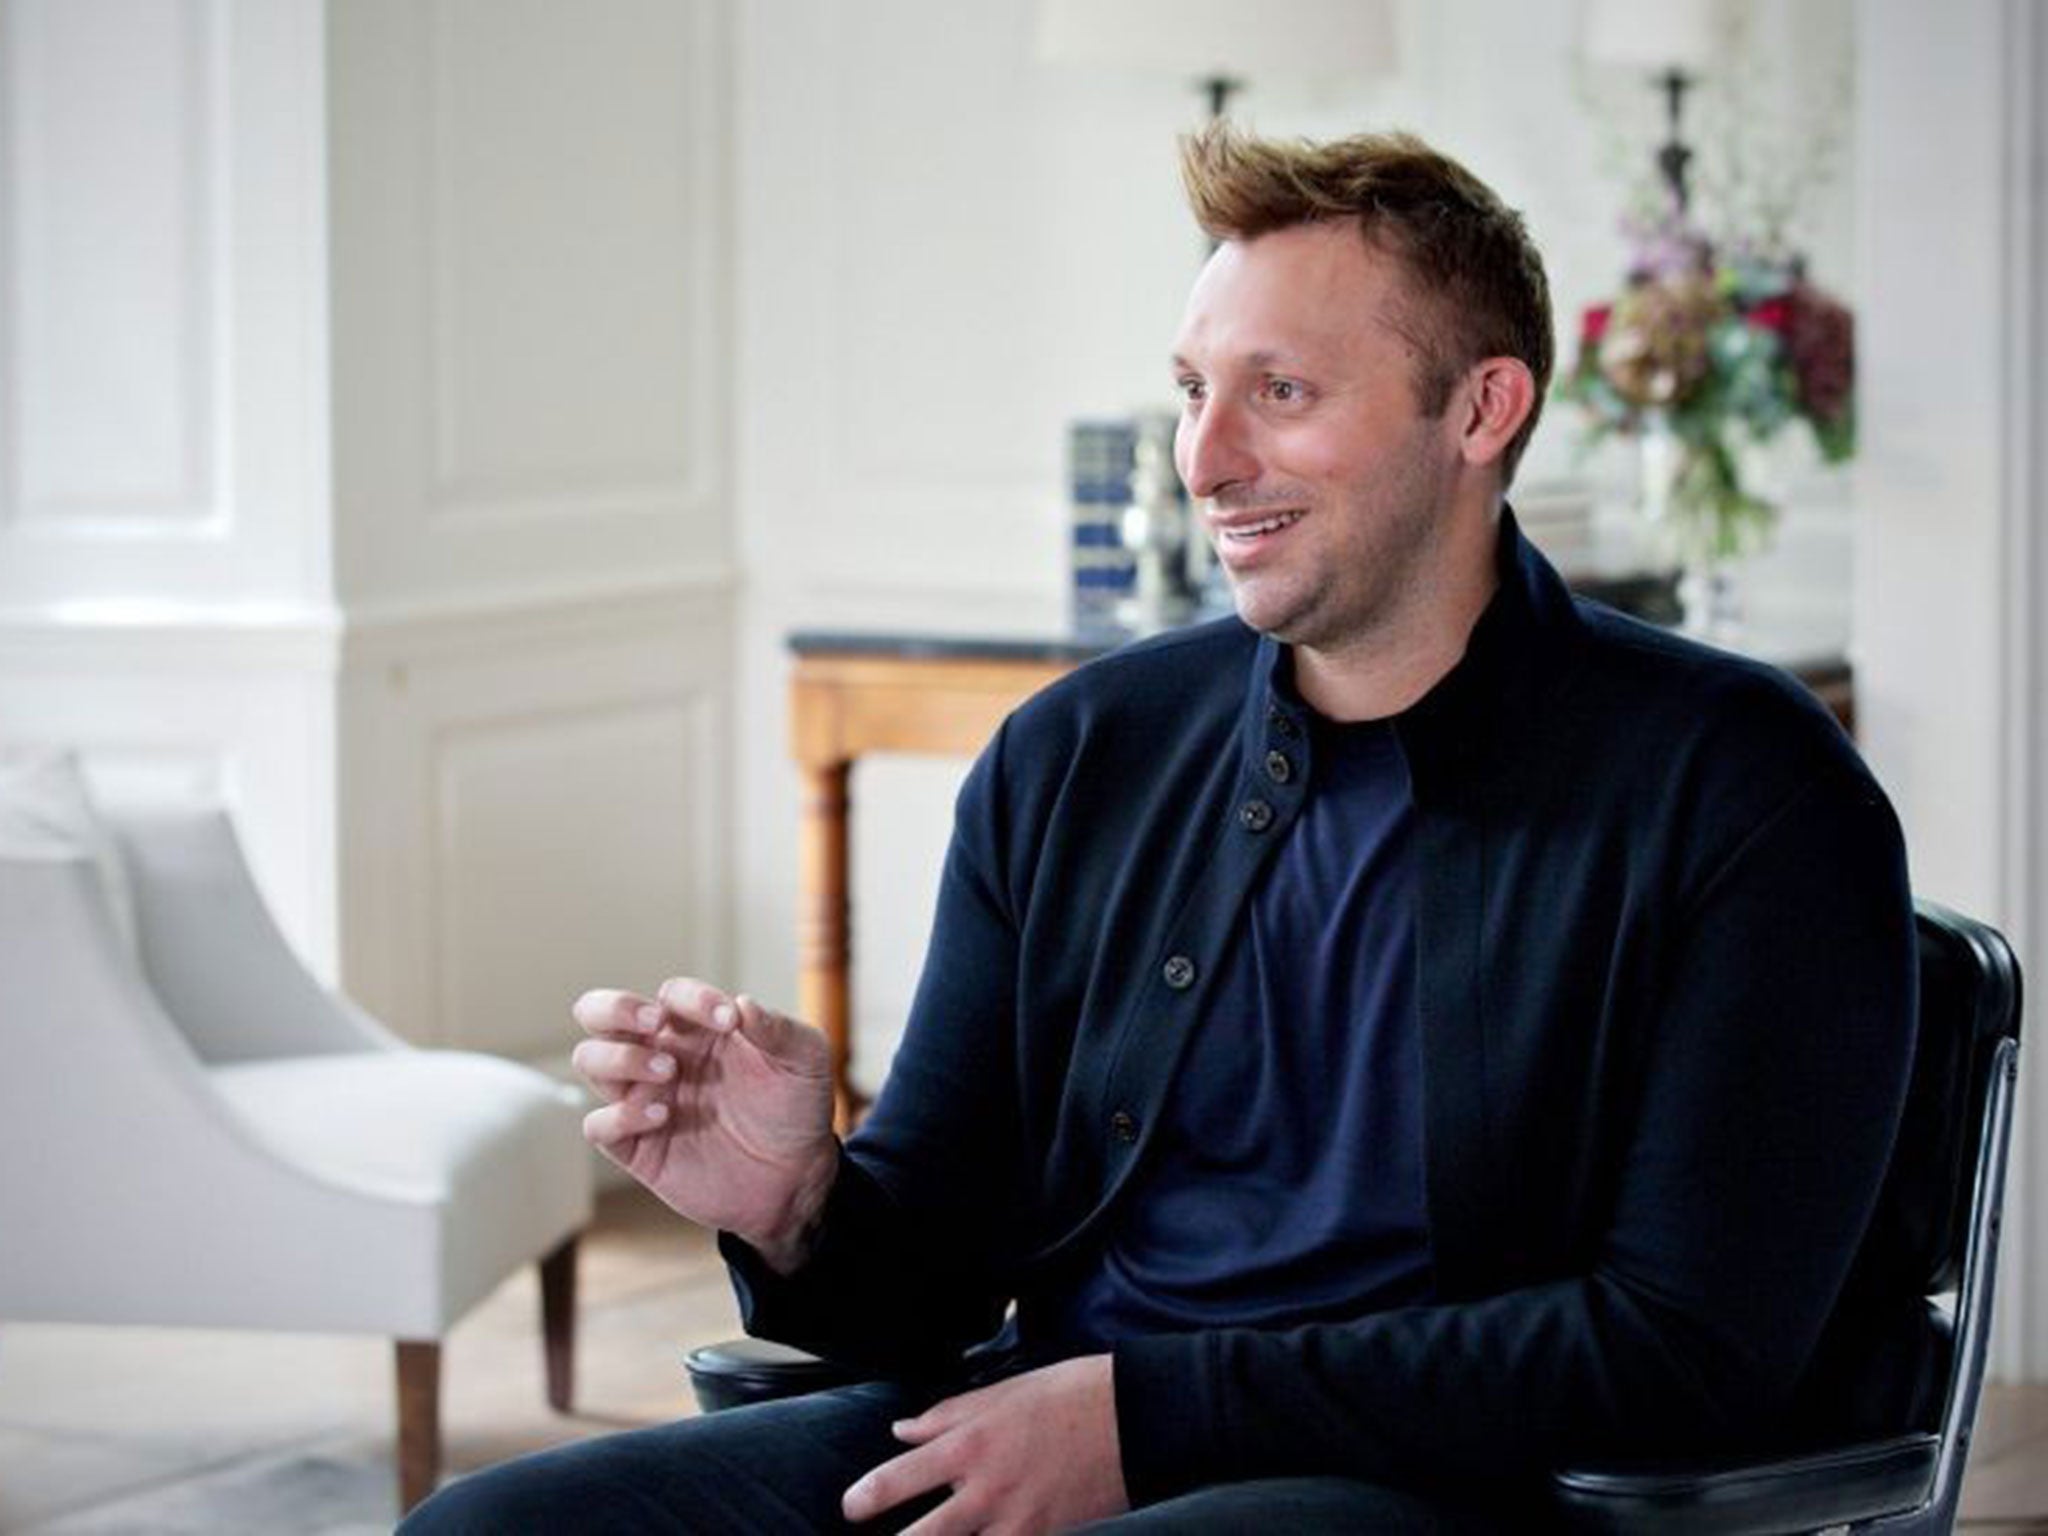 Ian Thorpe’s revealing interview with Michael Parkinson was broadcast in Australia yesterday